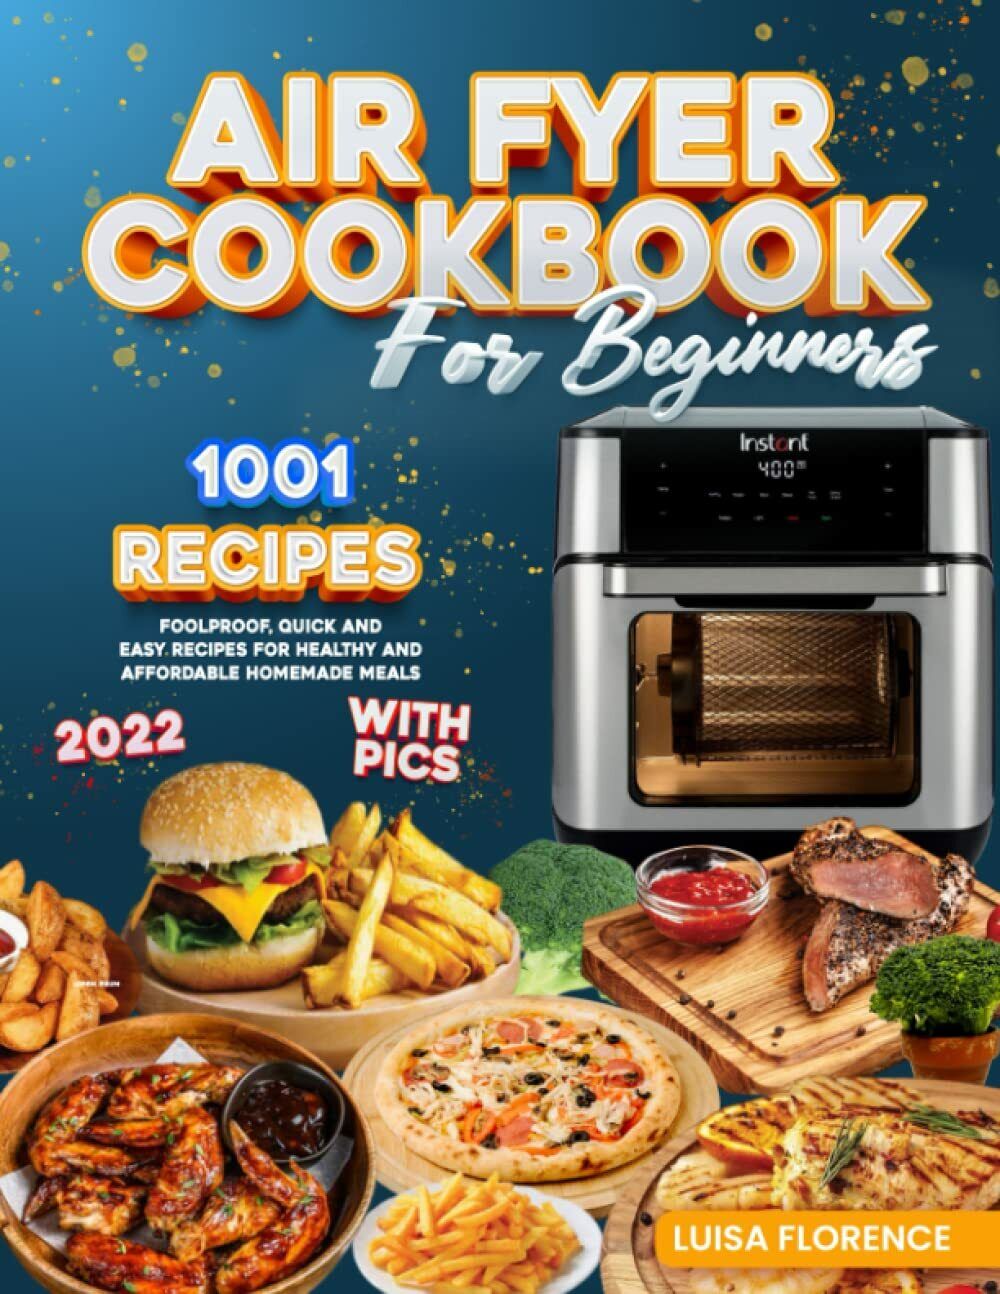 Air Fryer Cookbook for Beginners: 1001 Foolproof Quick And Easy Recipes For Heal